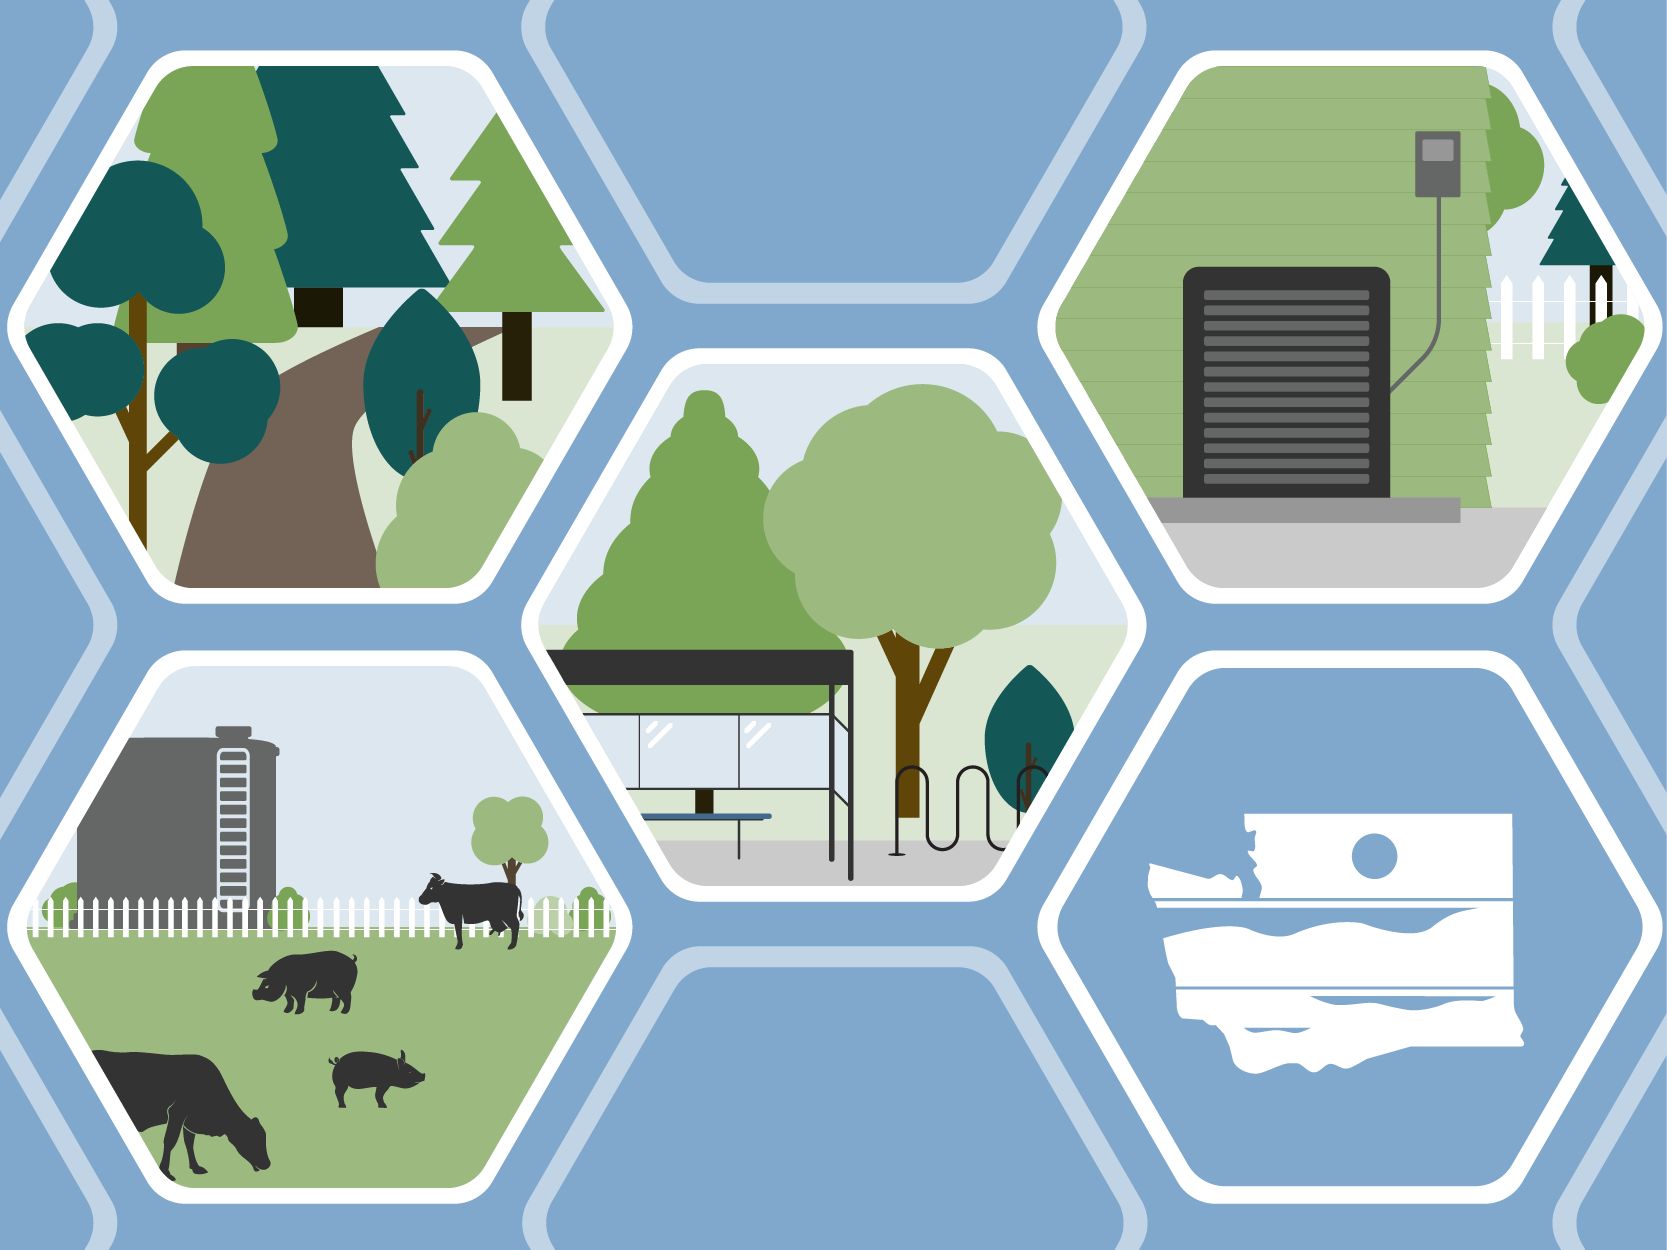  Four icons representing the types of offset projects: forestry, livestock, urban forestry, and ozone depleting substances destruction.